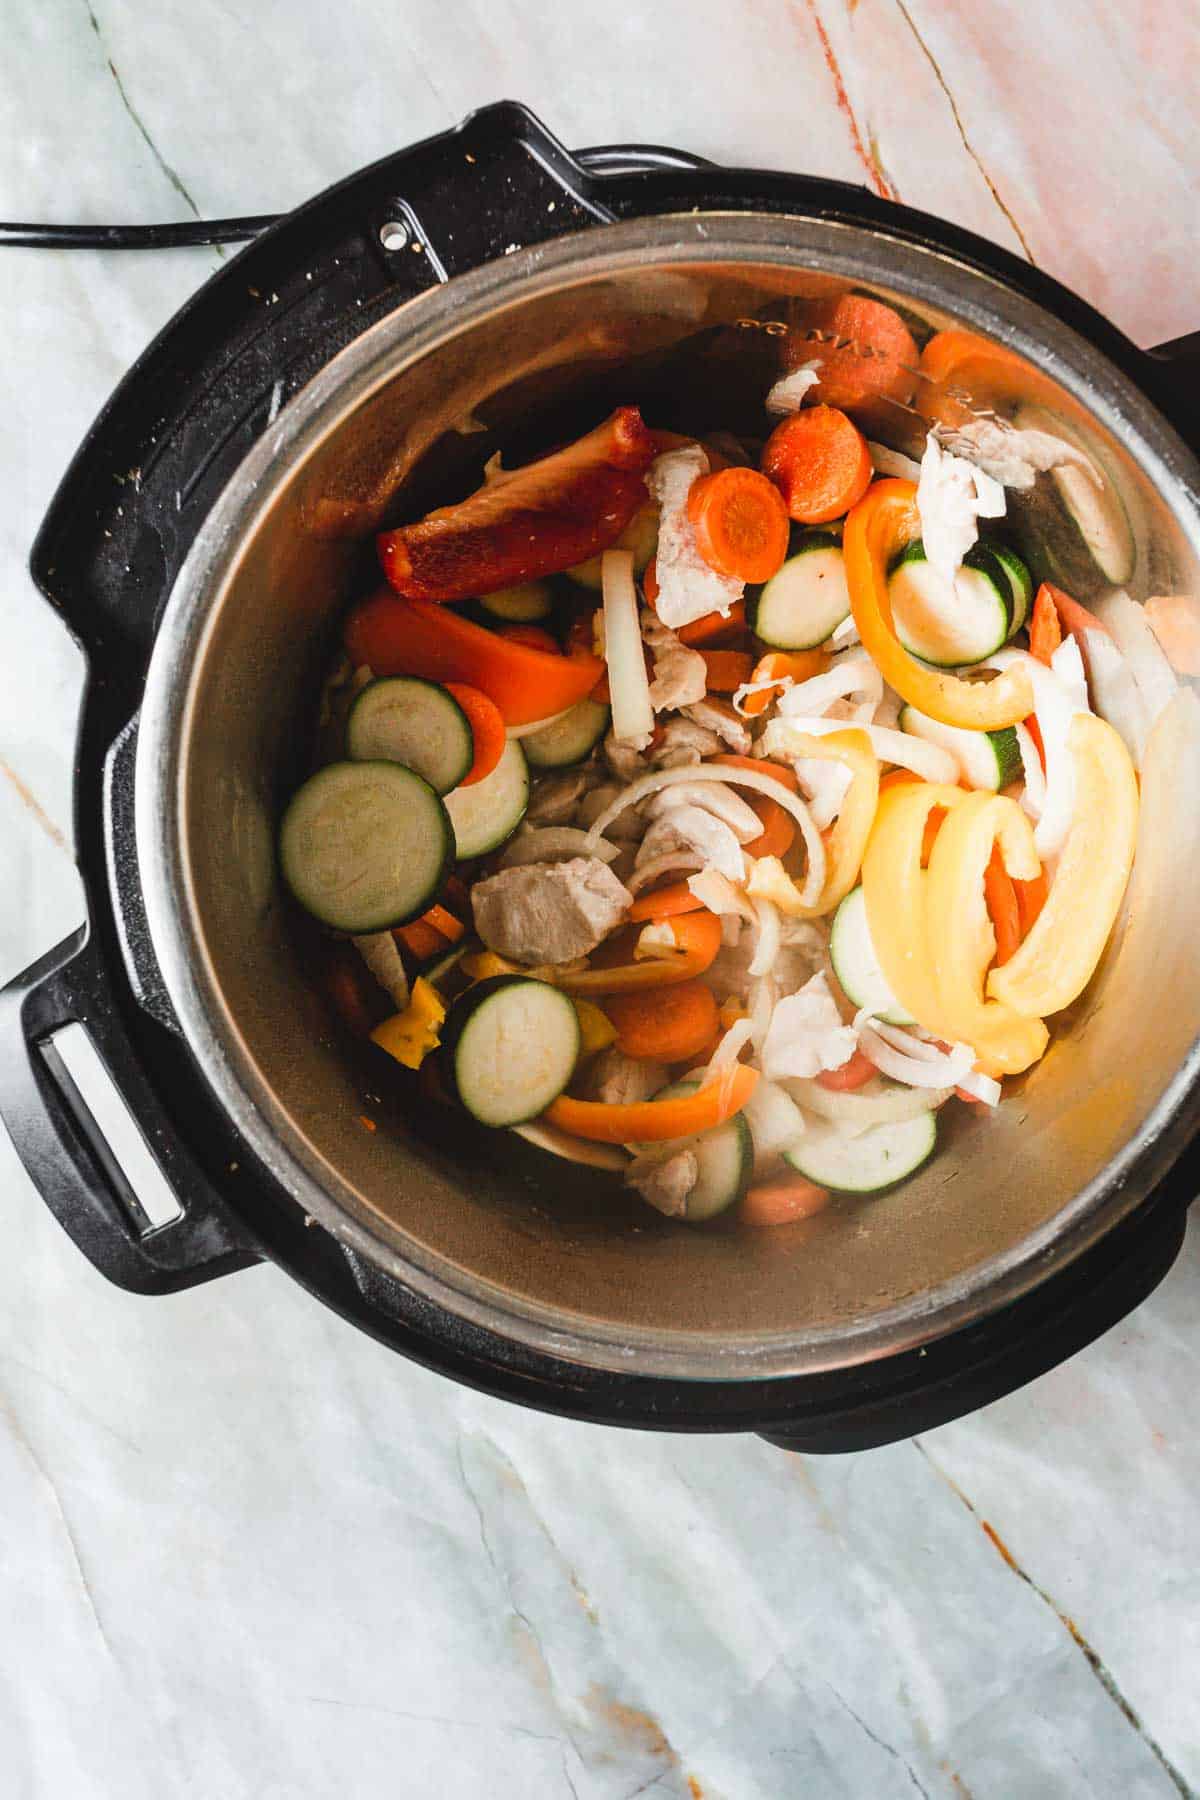 An instant pot filled with vegetables and chicken.